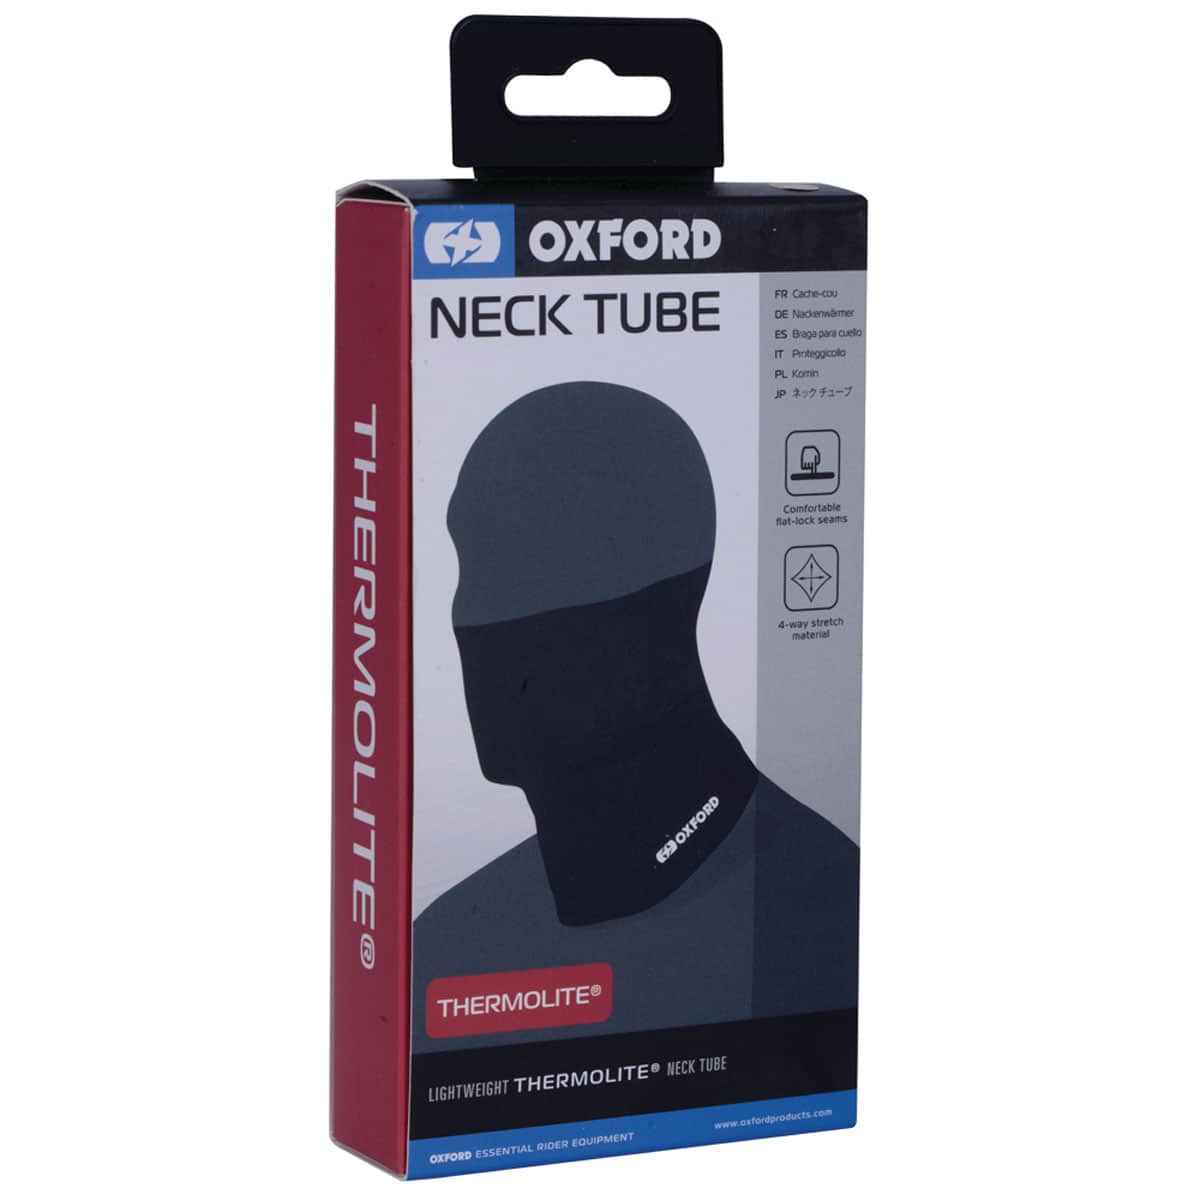 Oxford Neck Tube Thermolite: A thermal lightweight neck tube